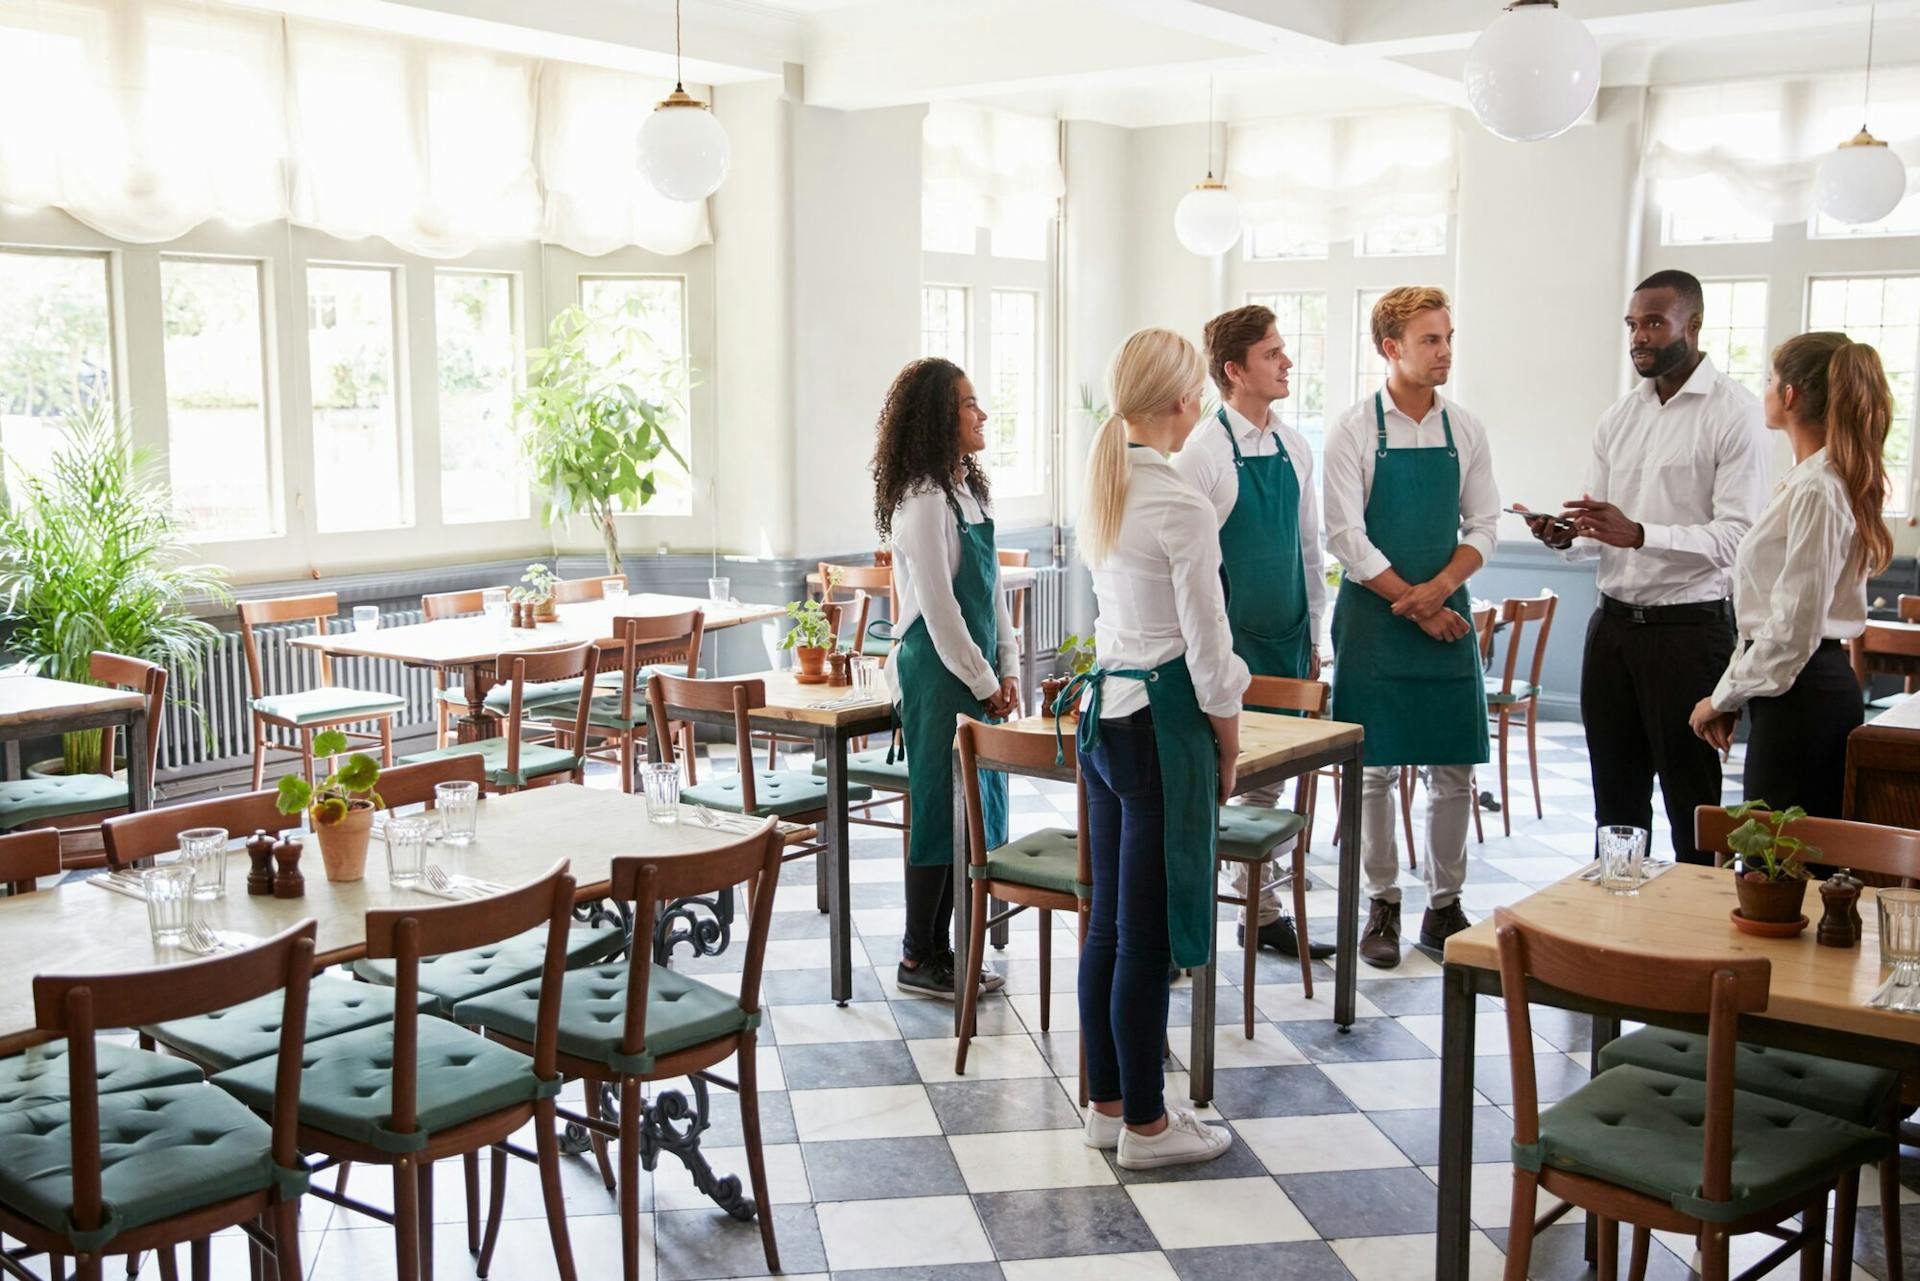 How to Attract and Retain Hospitality Staff